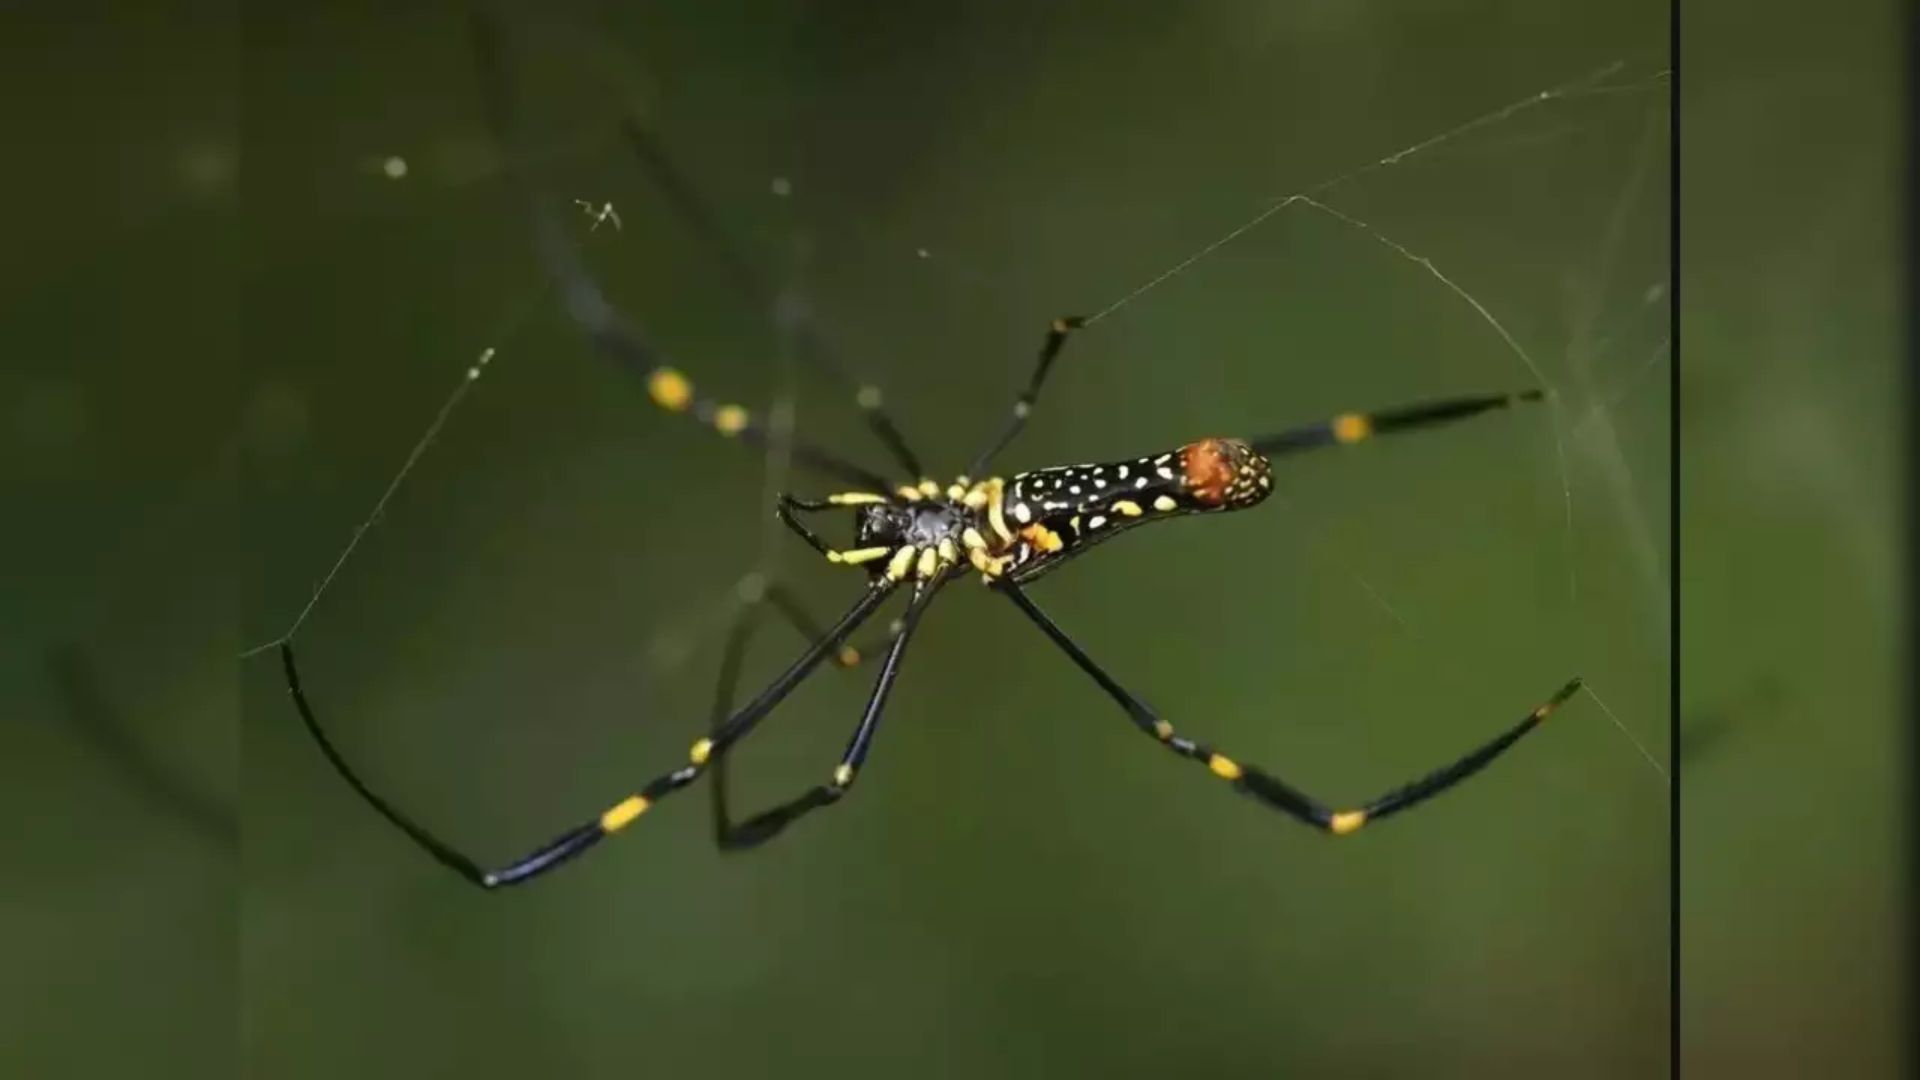 Giant, Venomous Joro Spiders Could Invade New York City This Summer